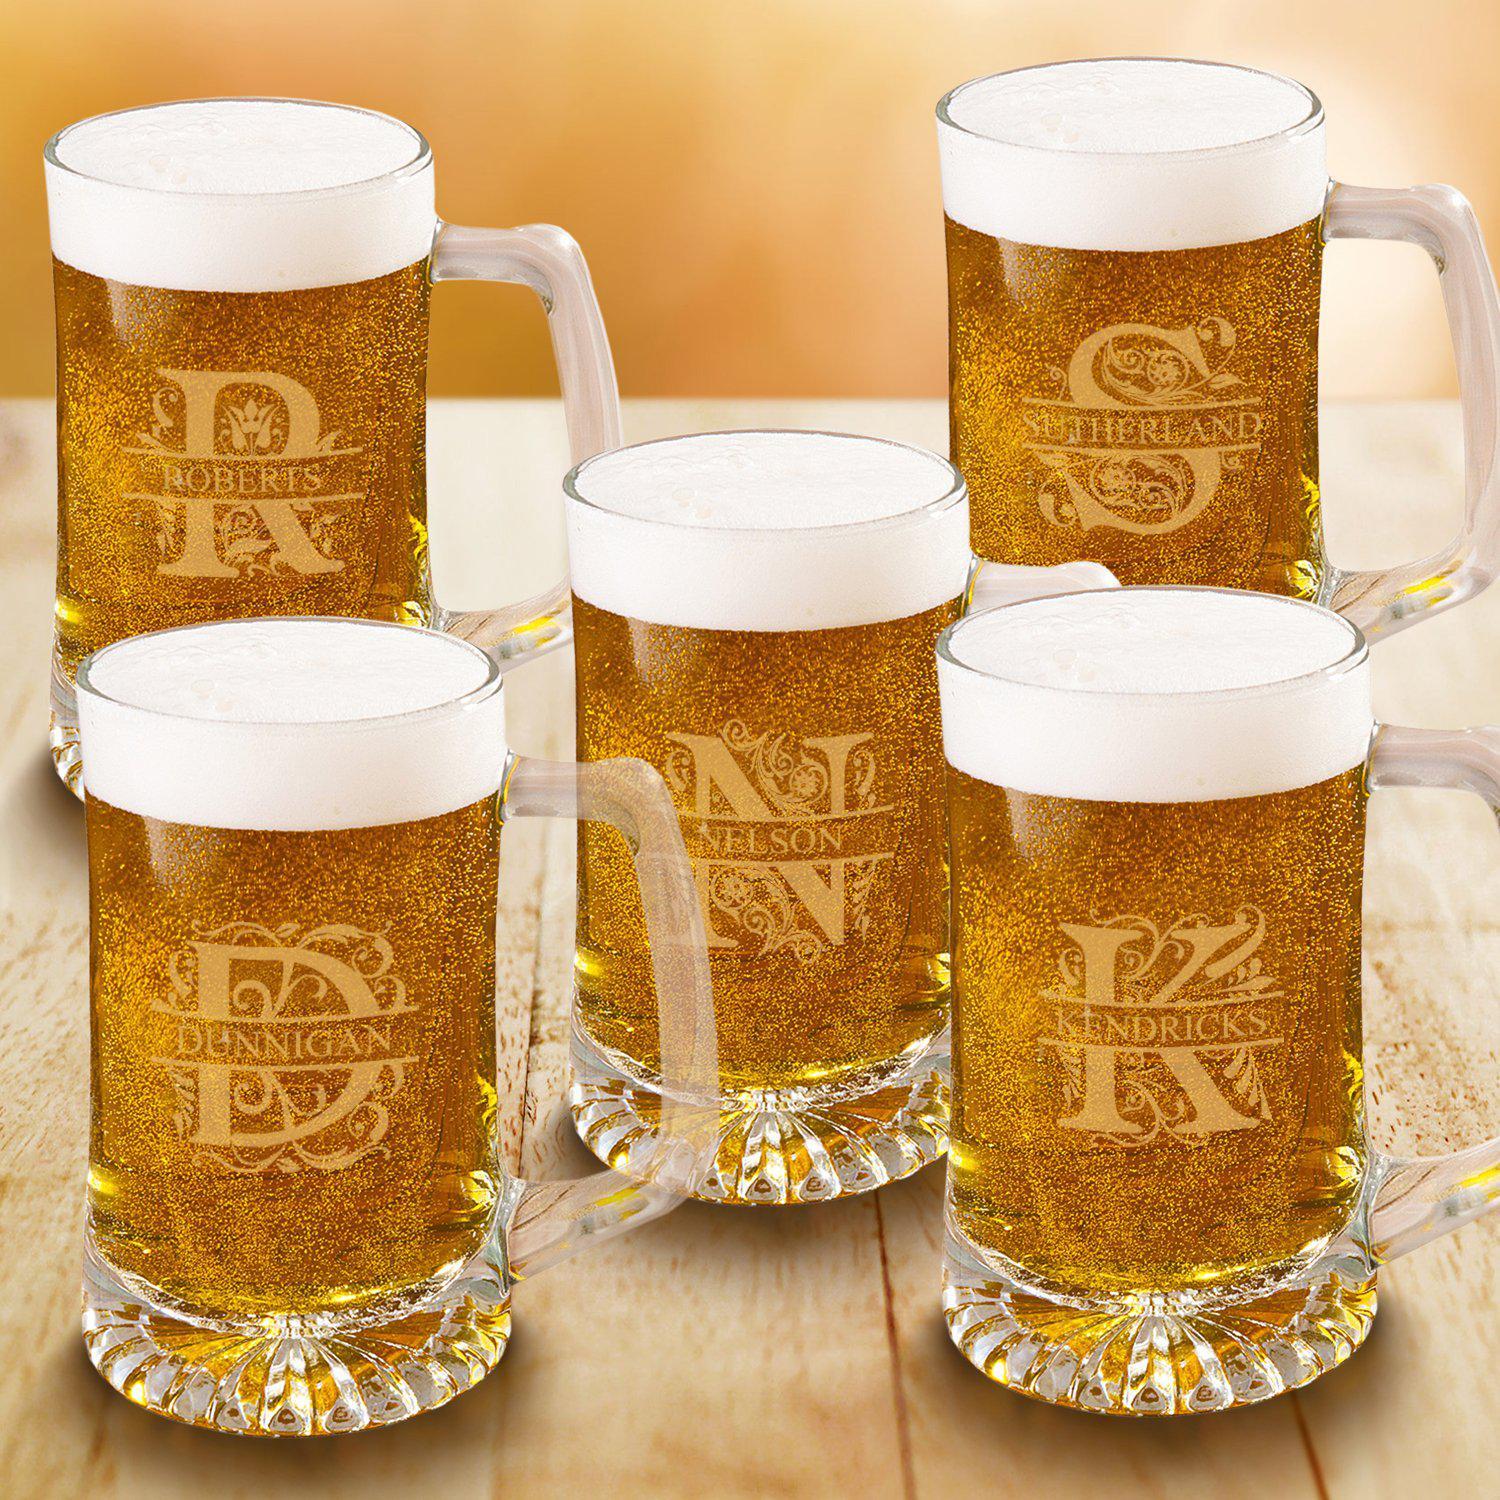 Personalized Beer Stein Set of 5 - 25 oz. Sports Mugs for Groomsmen